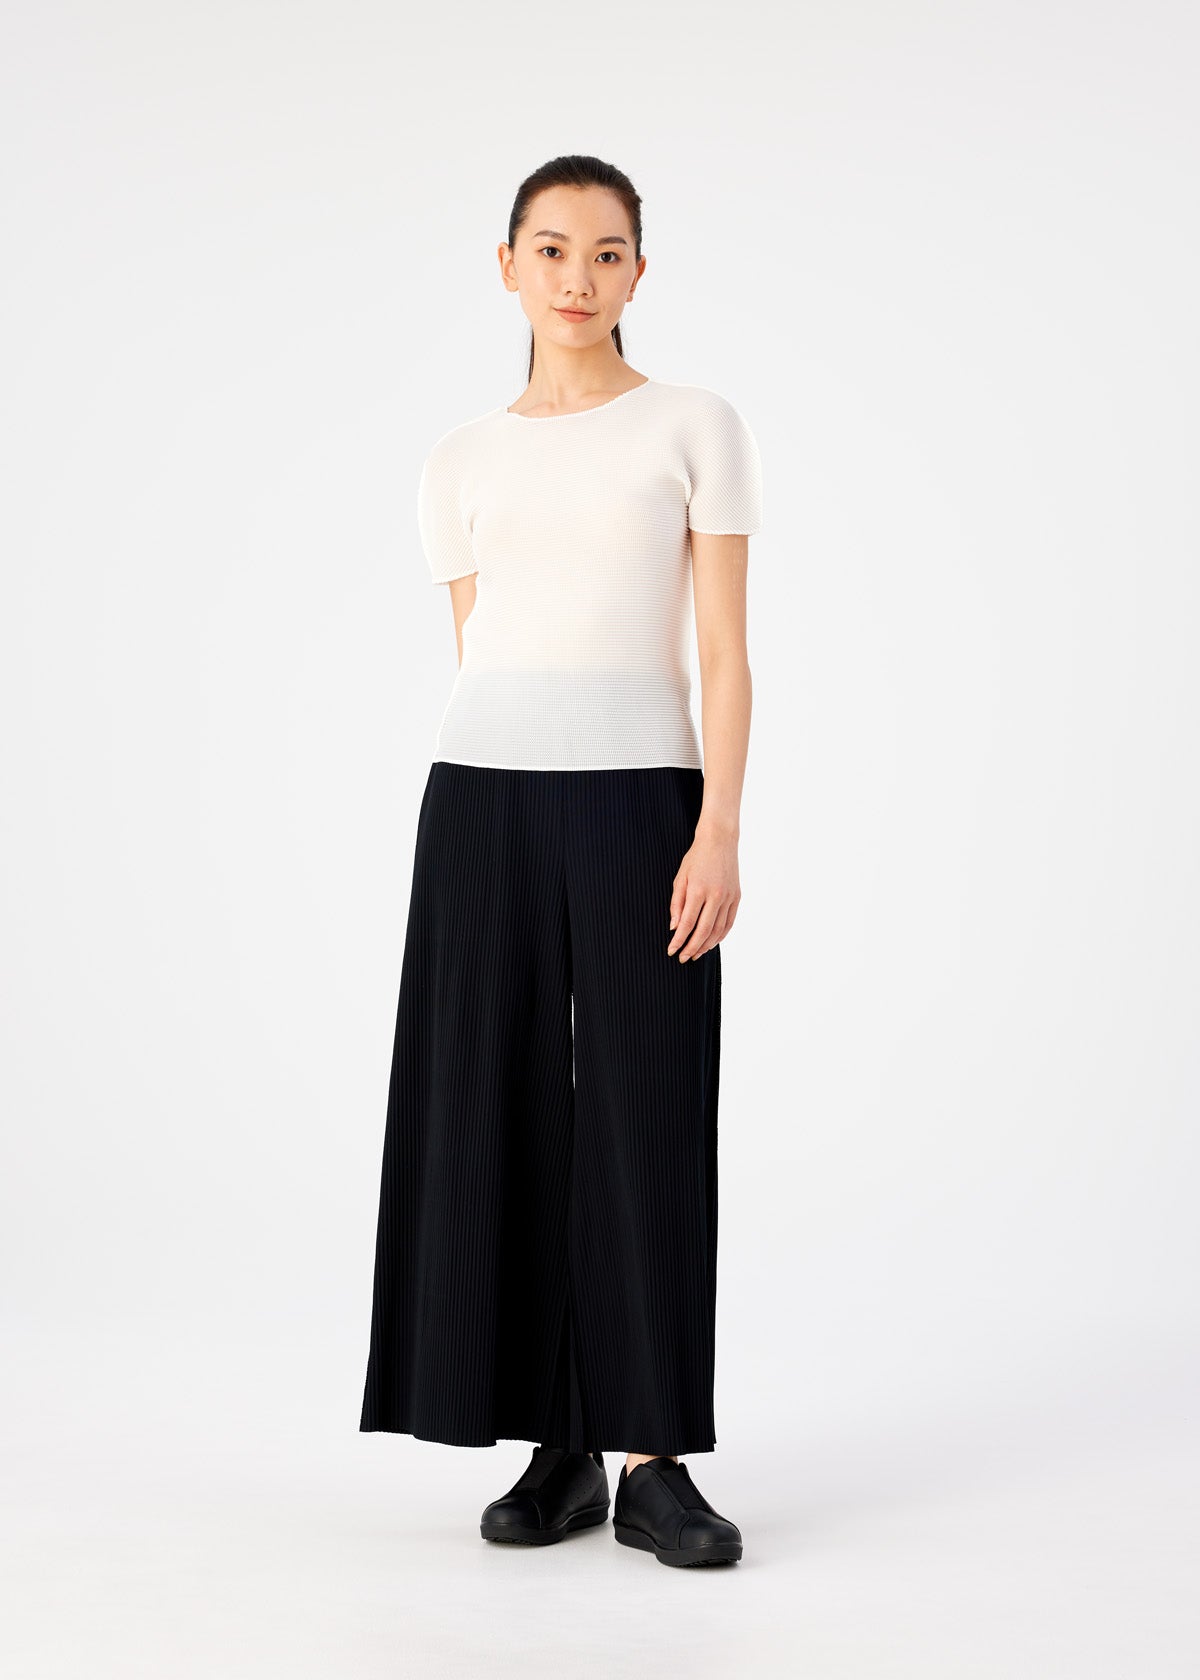 FINE KNIT PLEATS BLACK PANTS | The official ISSEY MIYAKE ONLINE